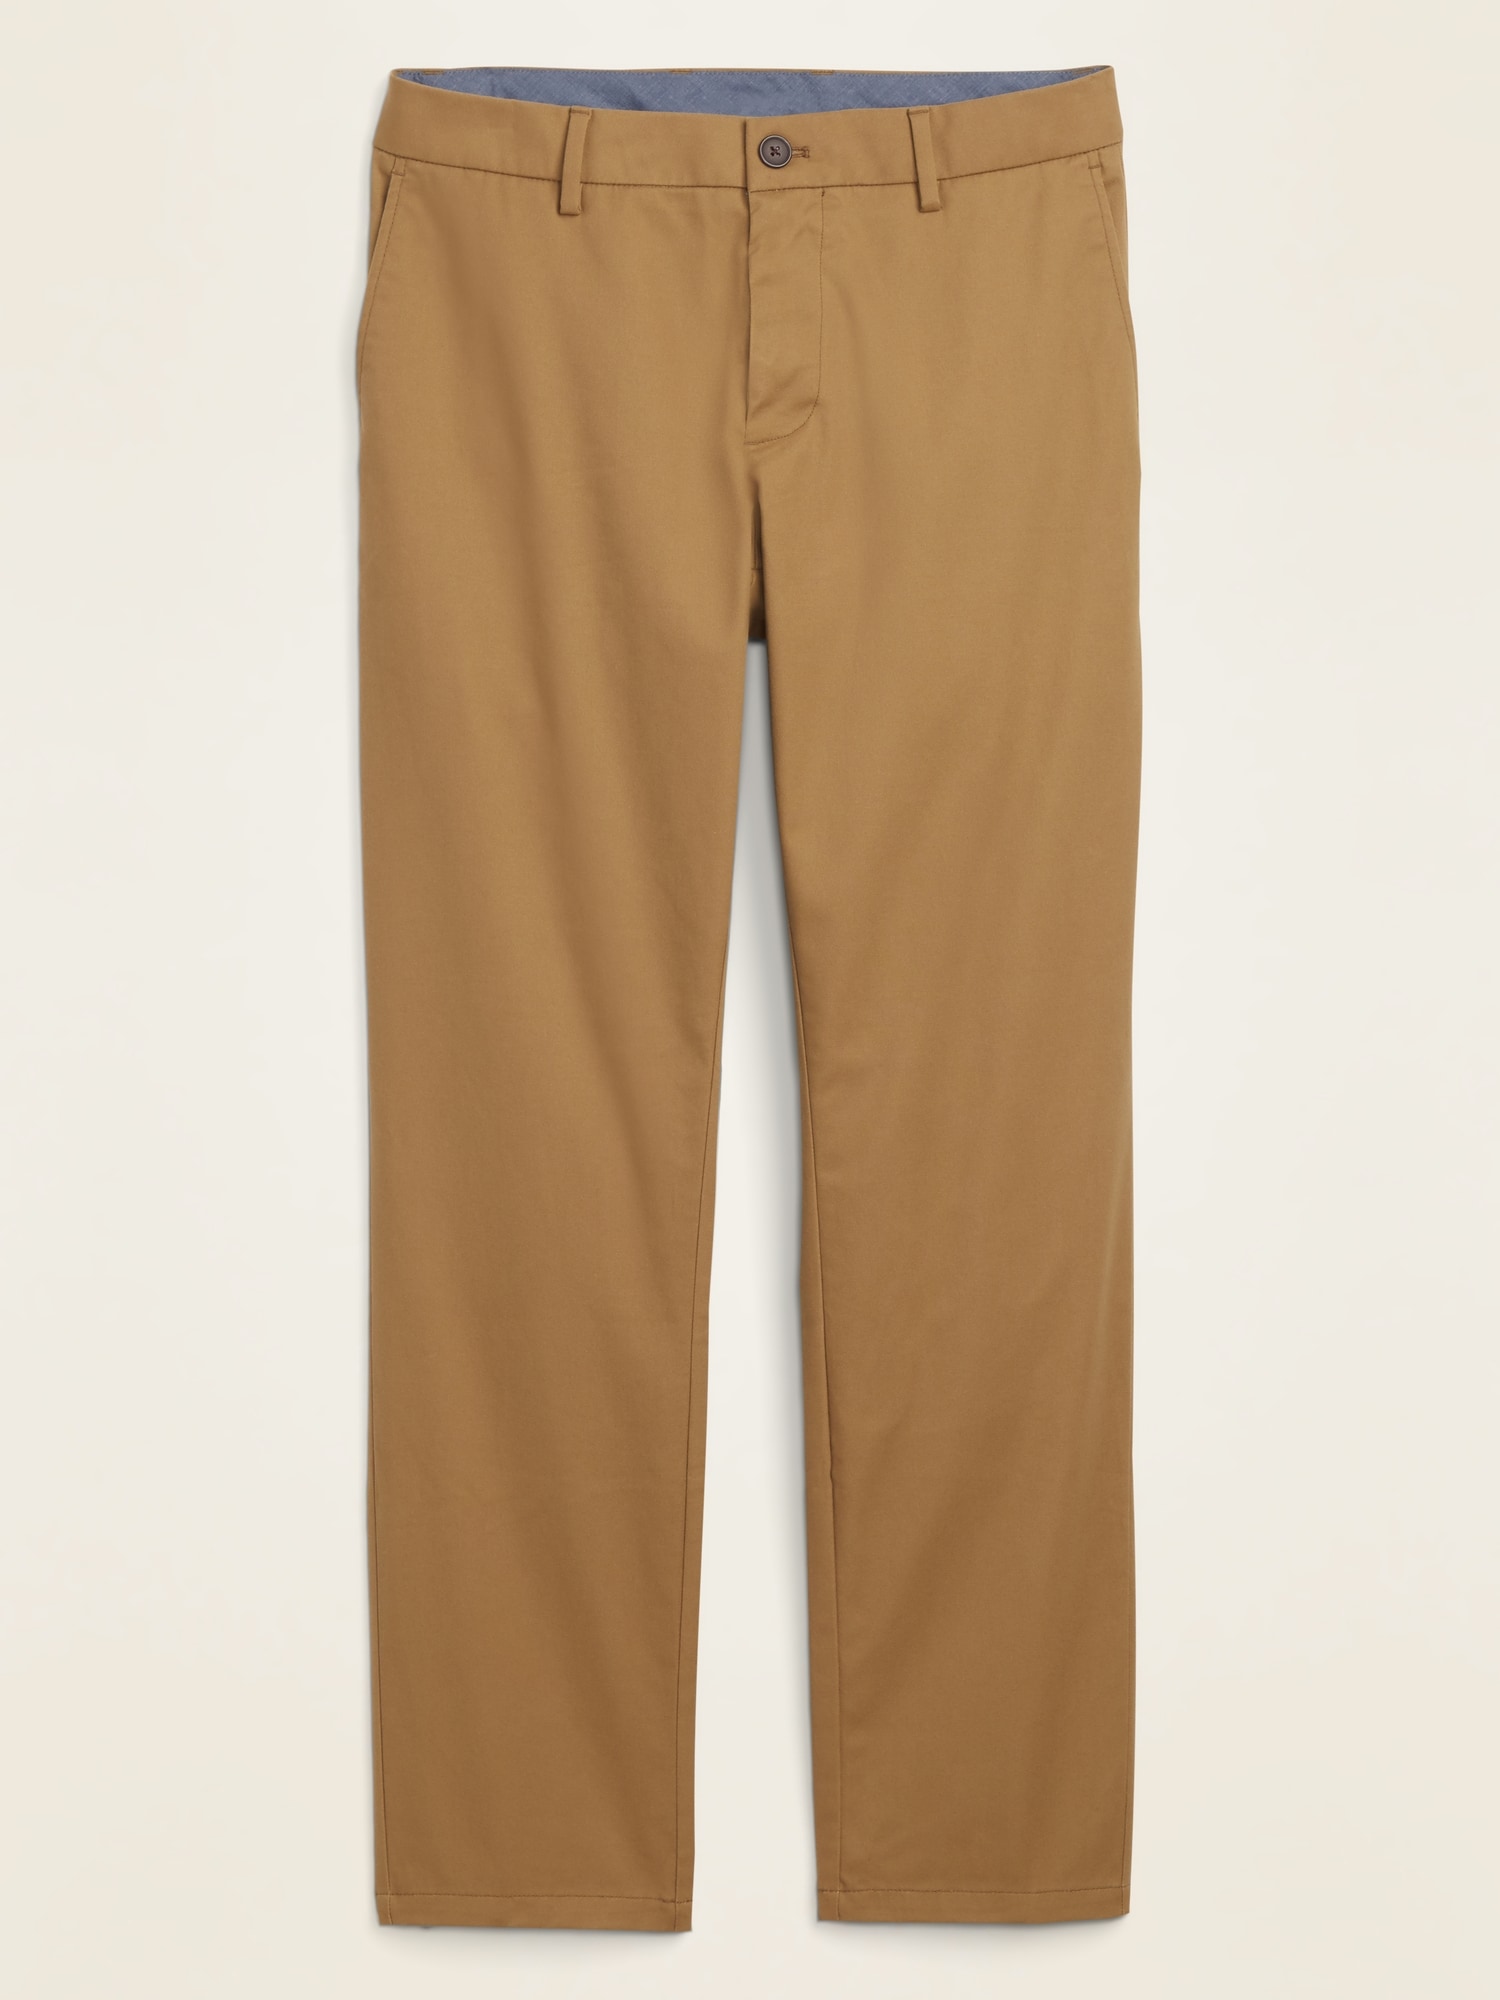 HighWaisted Pixie Skinny Ankle Pants for Women  Old Navy